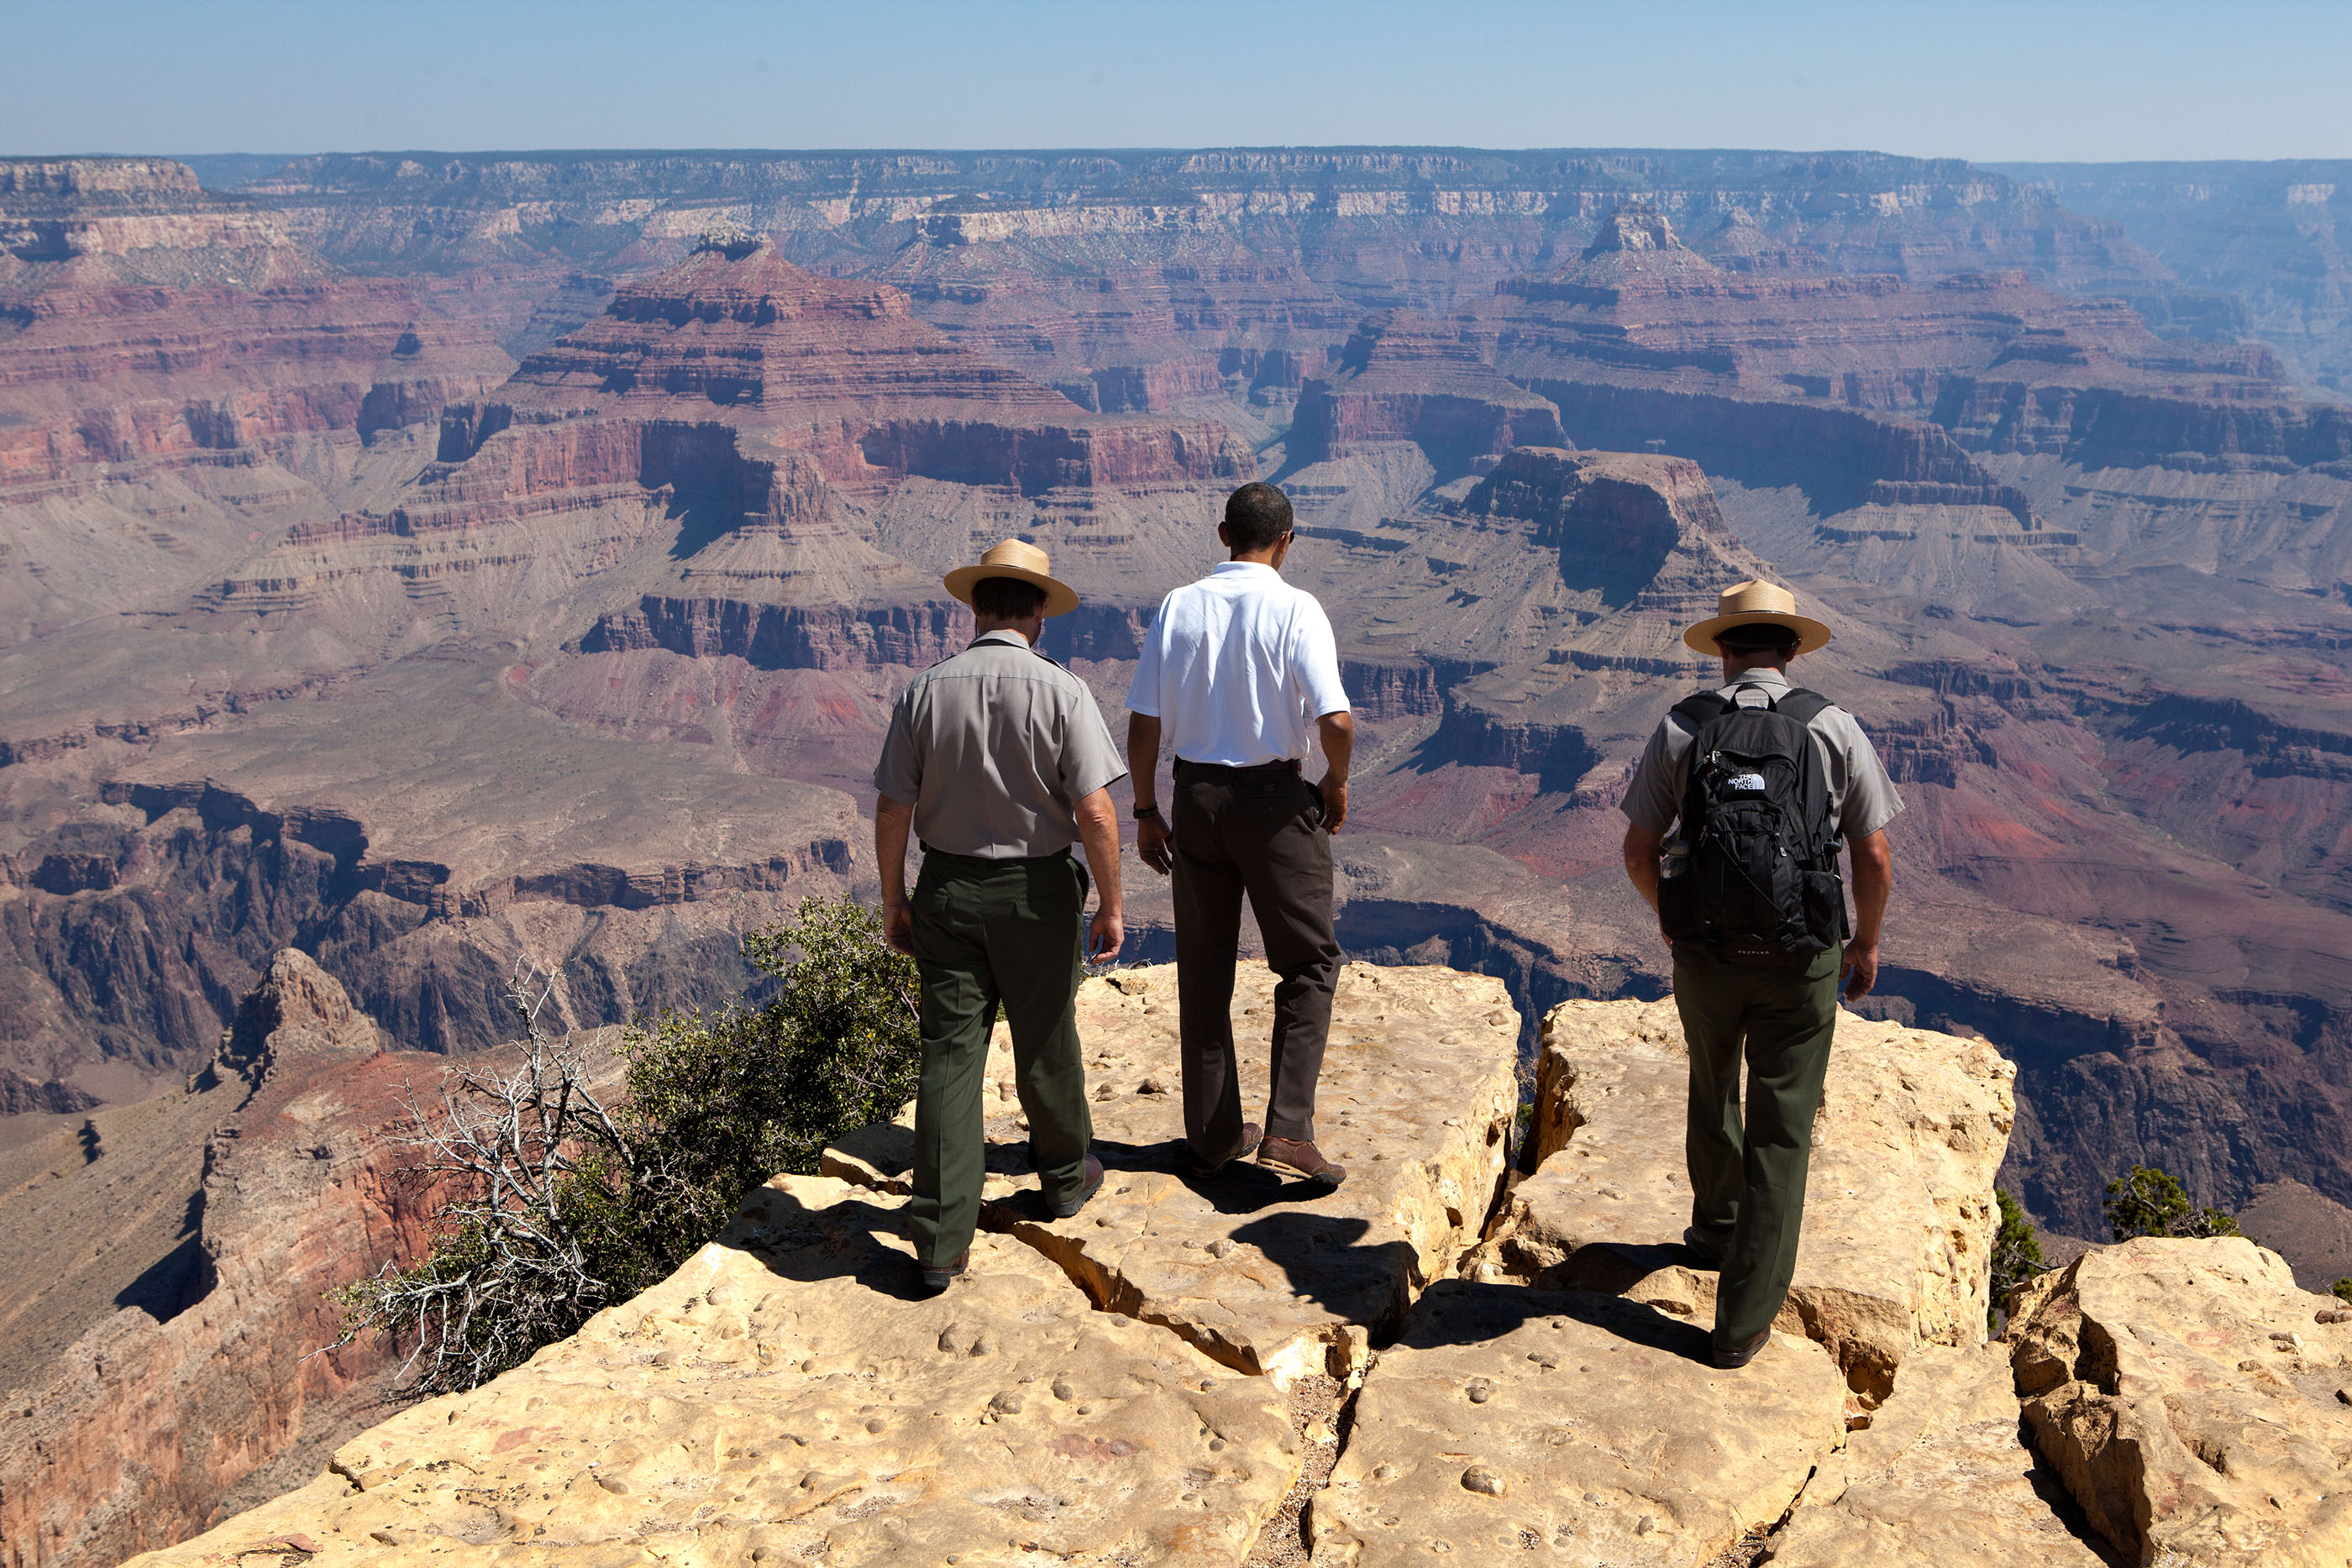 Arizona, Aug. 16, 2009. Viewing the Grand Canyon. (Official White House photo by Pete Souza)